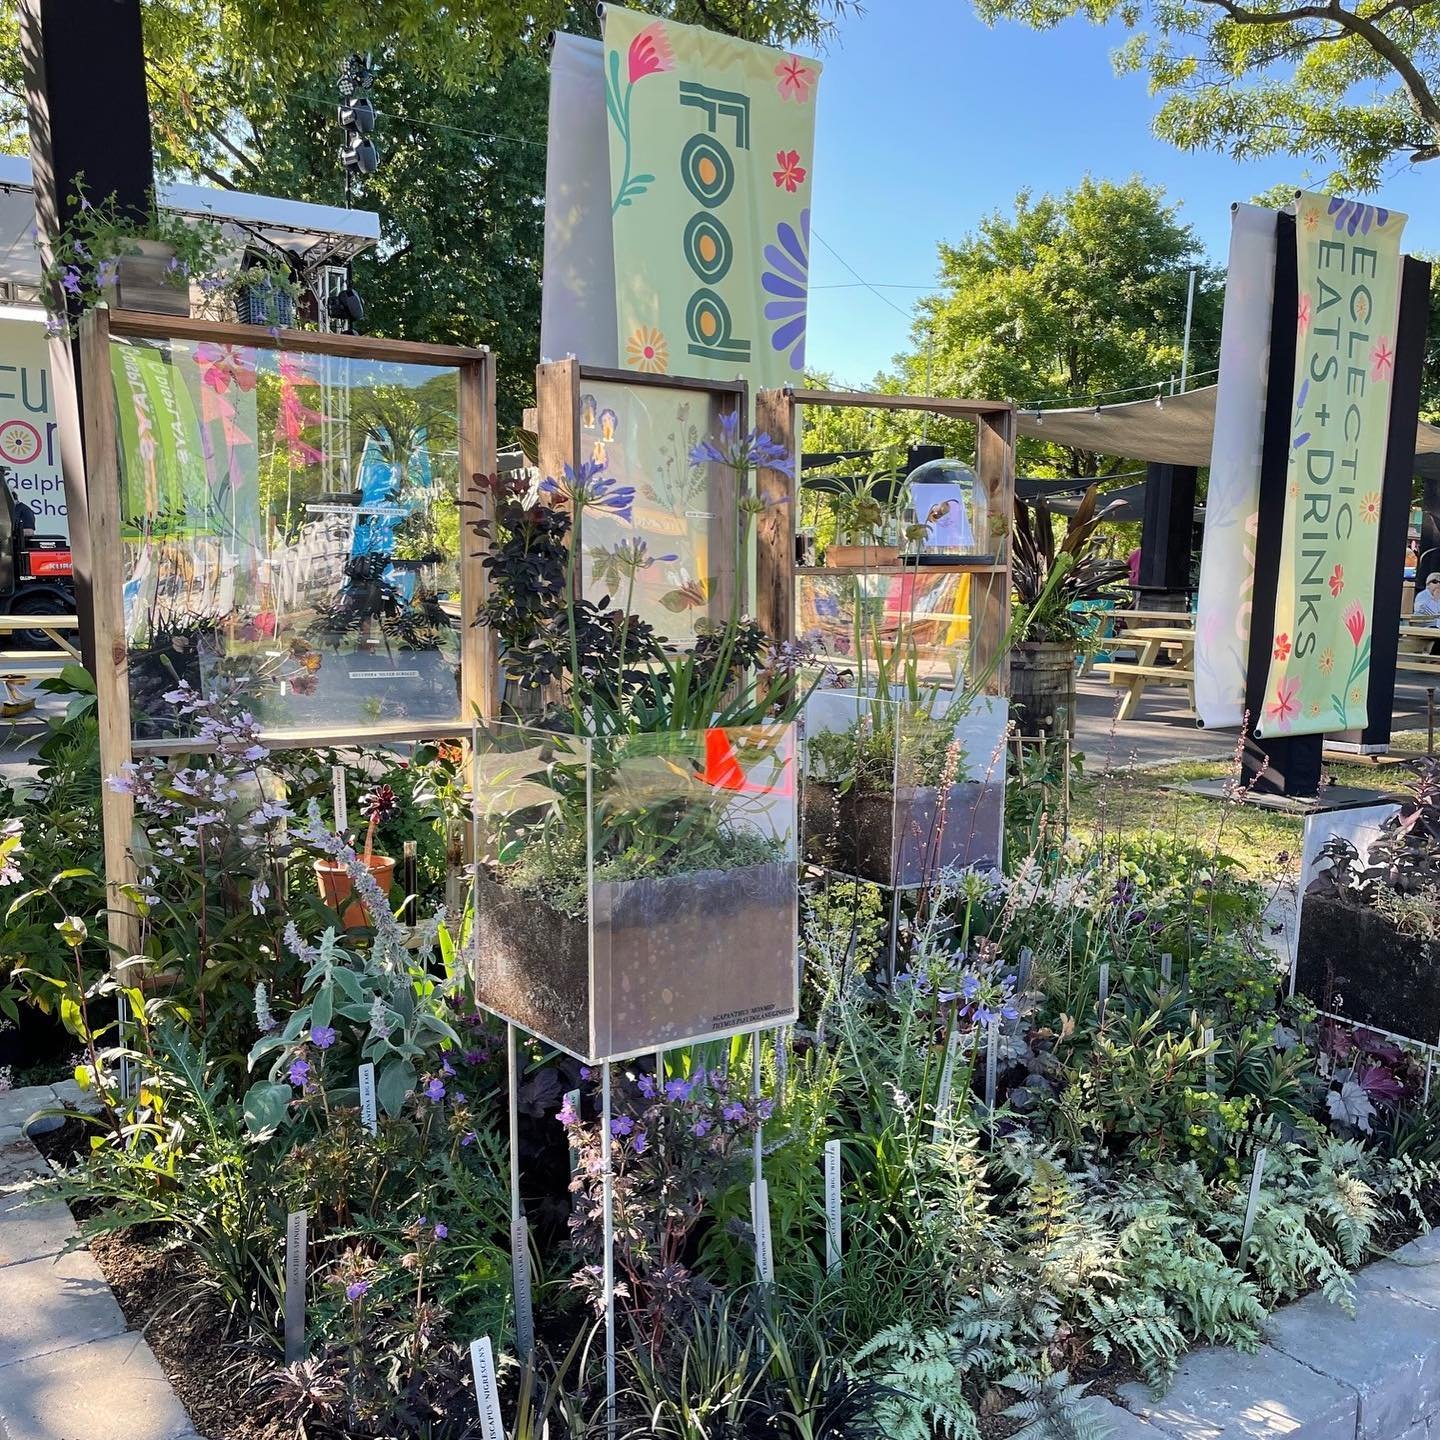 The EcoLab team has been hard at work preparing for this year's @phsgardening Flower Show!&nbsp;

Make sure you stop by our &quot;Garden of Curious Senses&quot; in the sensory garden area and look closely&nbsp;🔎&nbsp;at interesting plants and the di